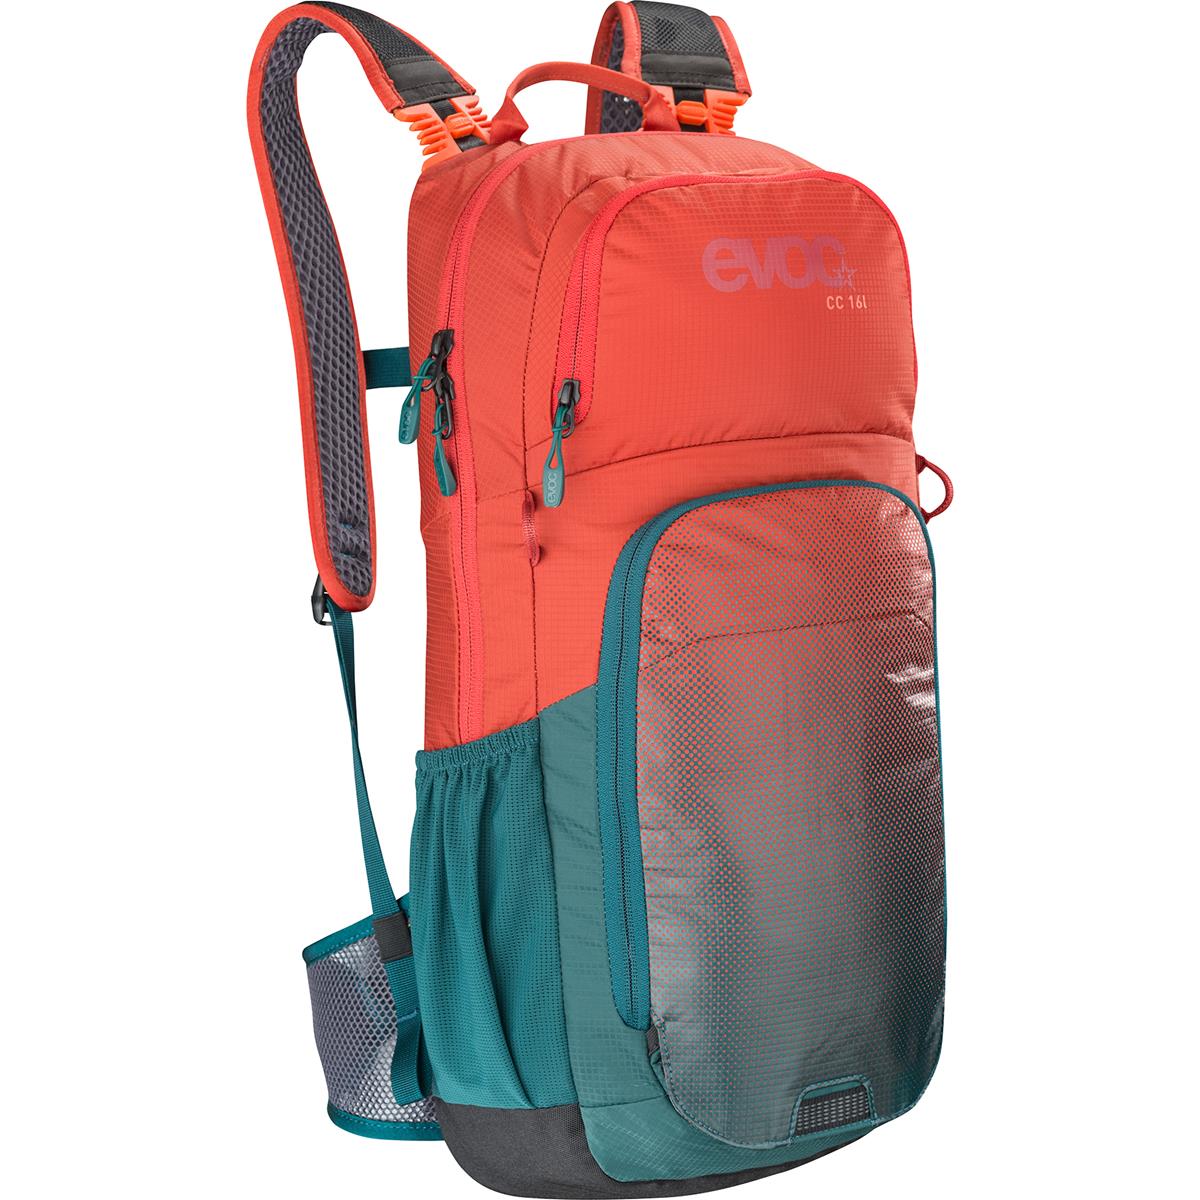 Evoc Backpack with Hydration System Compartment Cross Country Chili Red/Petrol, 16 Liter